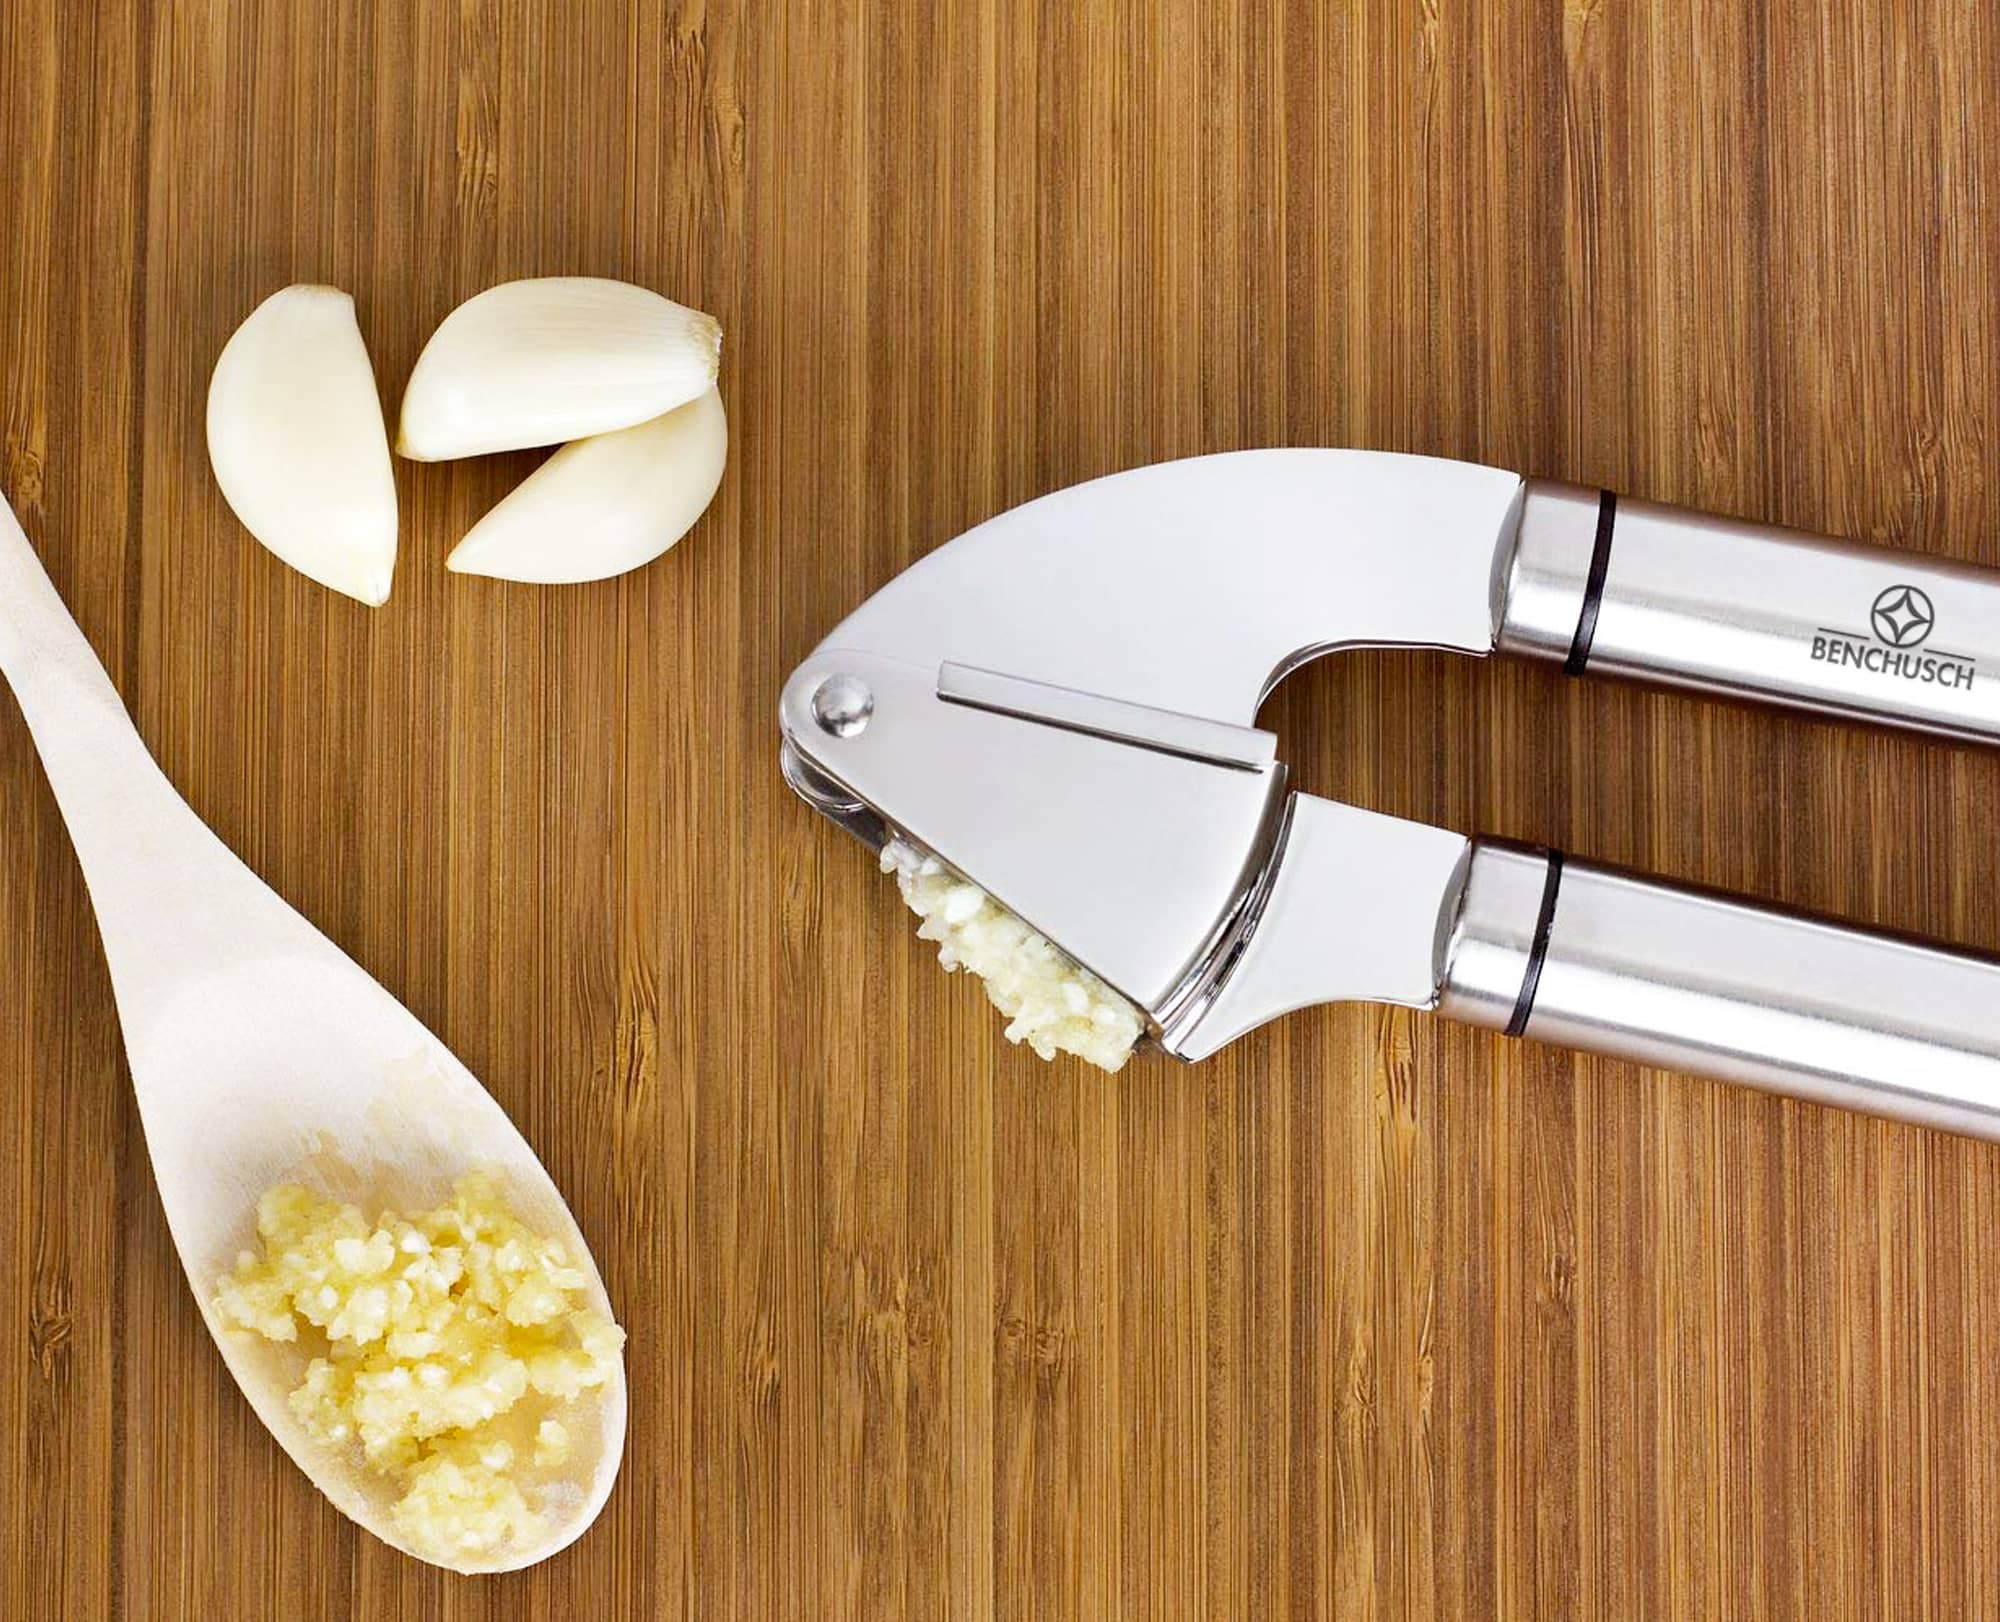 Benchusch garlic press with minced garlic and peeled garlic on the wooden background